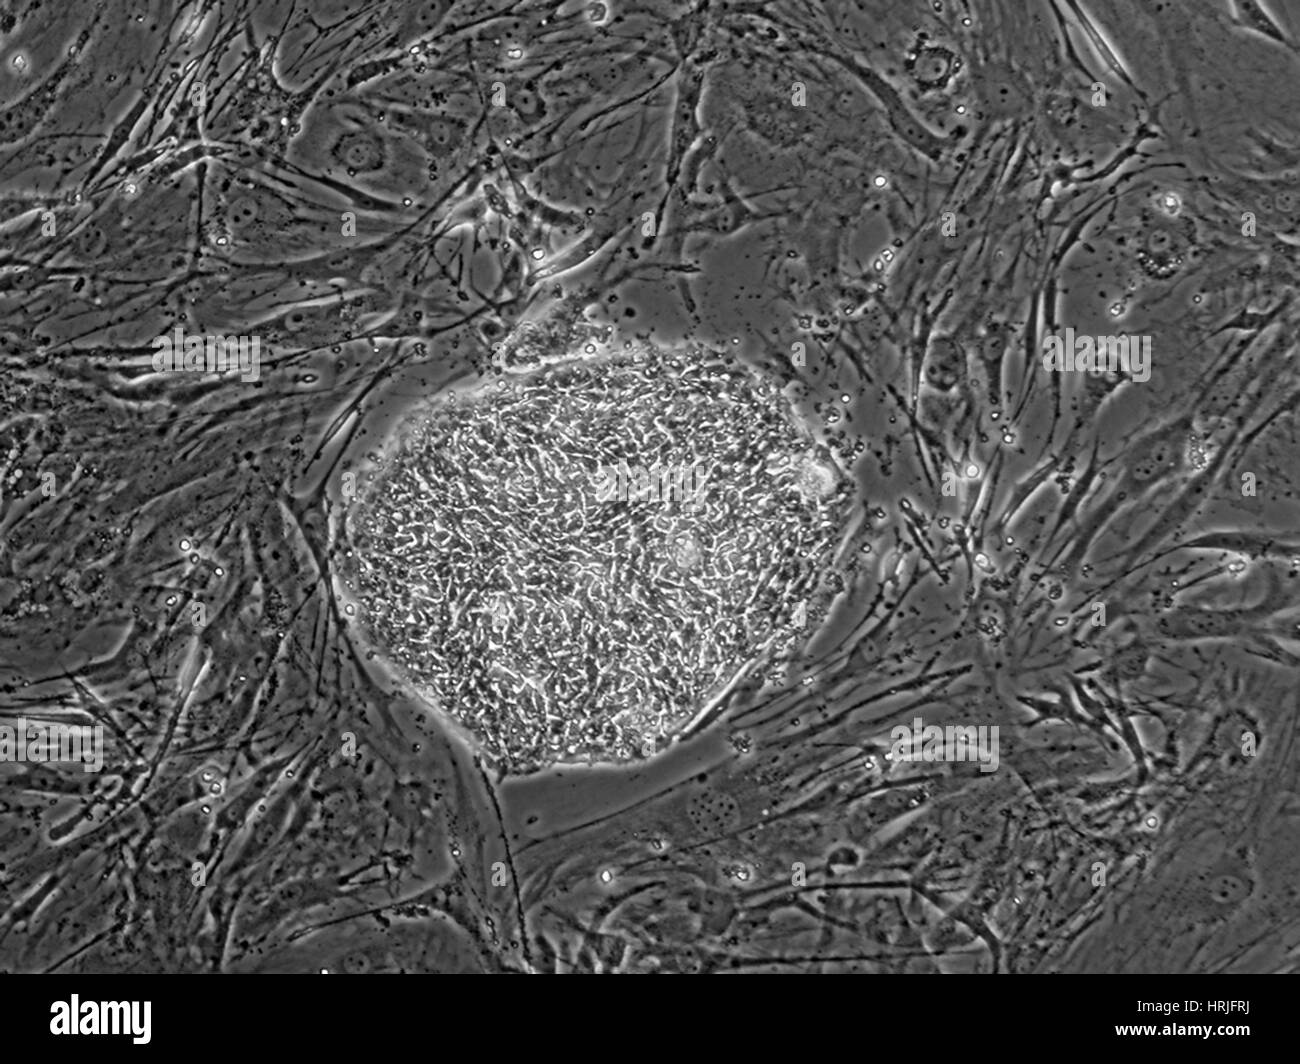 Human Embryonic Stem Cell Line ES05 Stock Photo